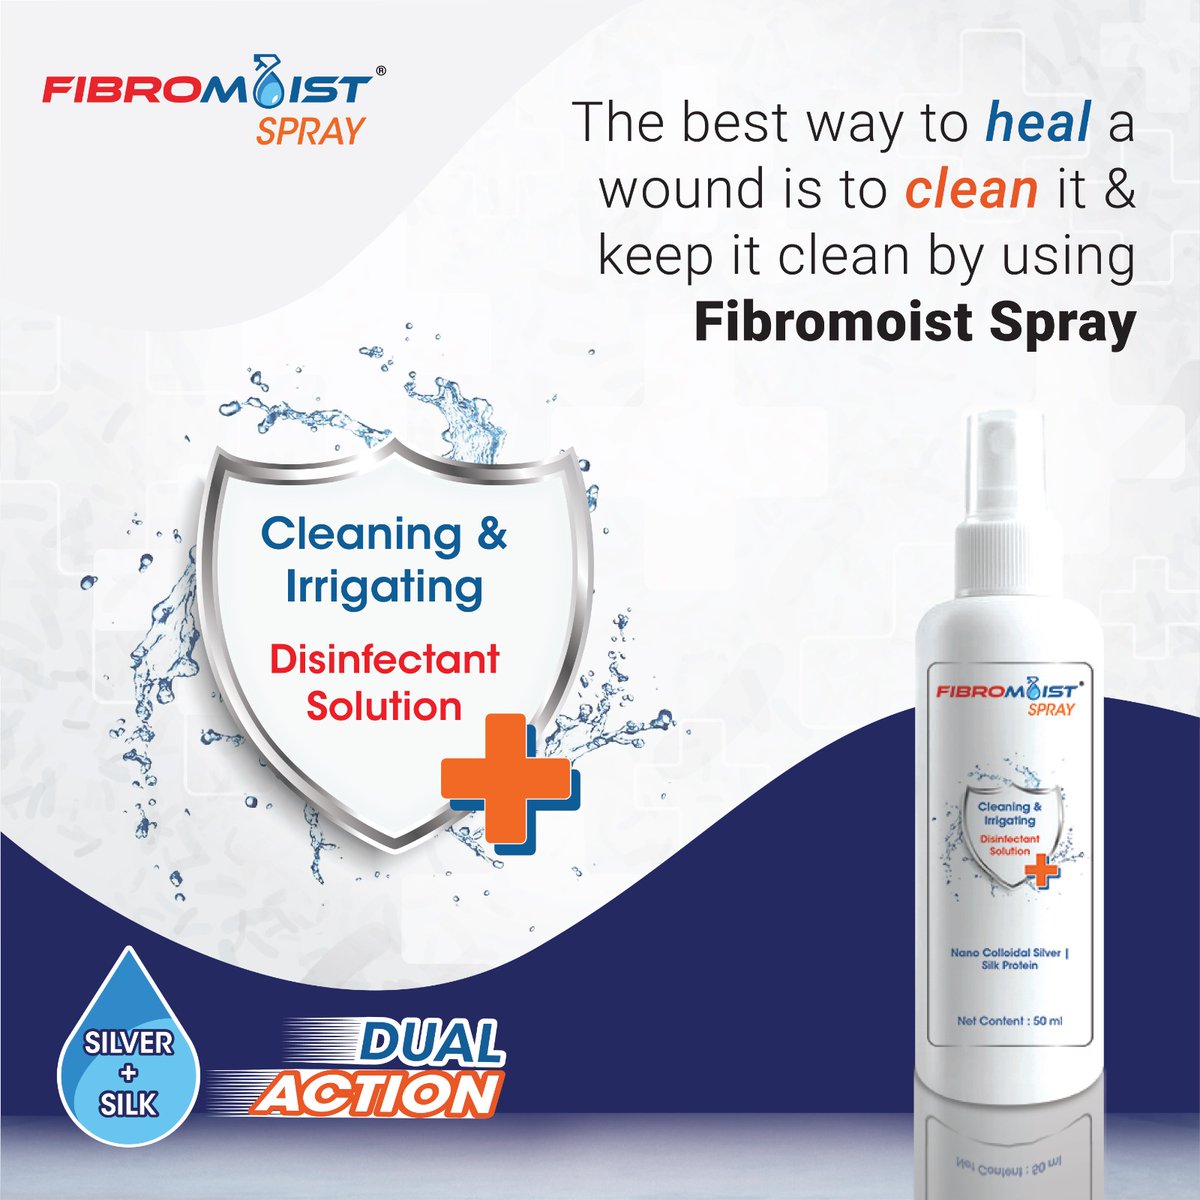 The best way to heal a wound is to clean it and keep it clean by using Fibromoist spay. Disinfect your wound in every drop of spary #woundclean #woundspray #fibroheal #woundcare #fibrohealwoundcare #silkprotein @fibroheal @Vvk_mishra  #healfaster #painrelief #wound #healthcare